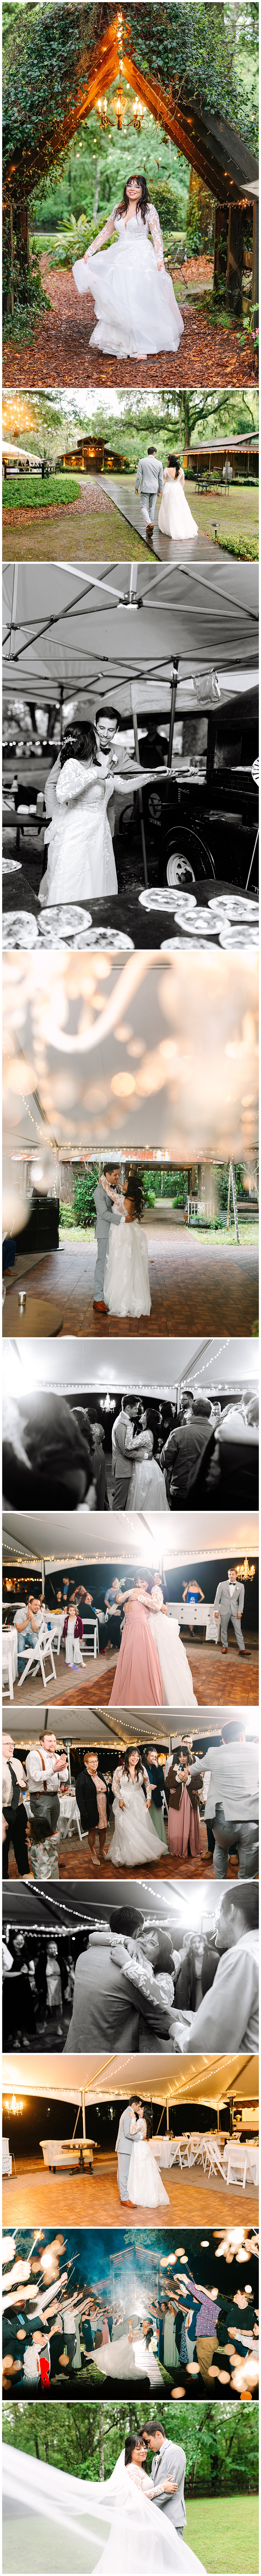 A collage of photos of a bride & groom enjoying their wedding reception at Tucker's Farmhouse in Green Cove Springs, FL taken by Laura Perez Photography